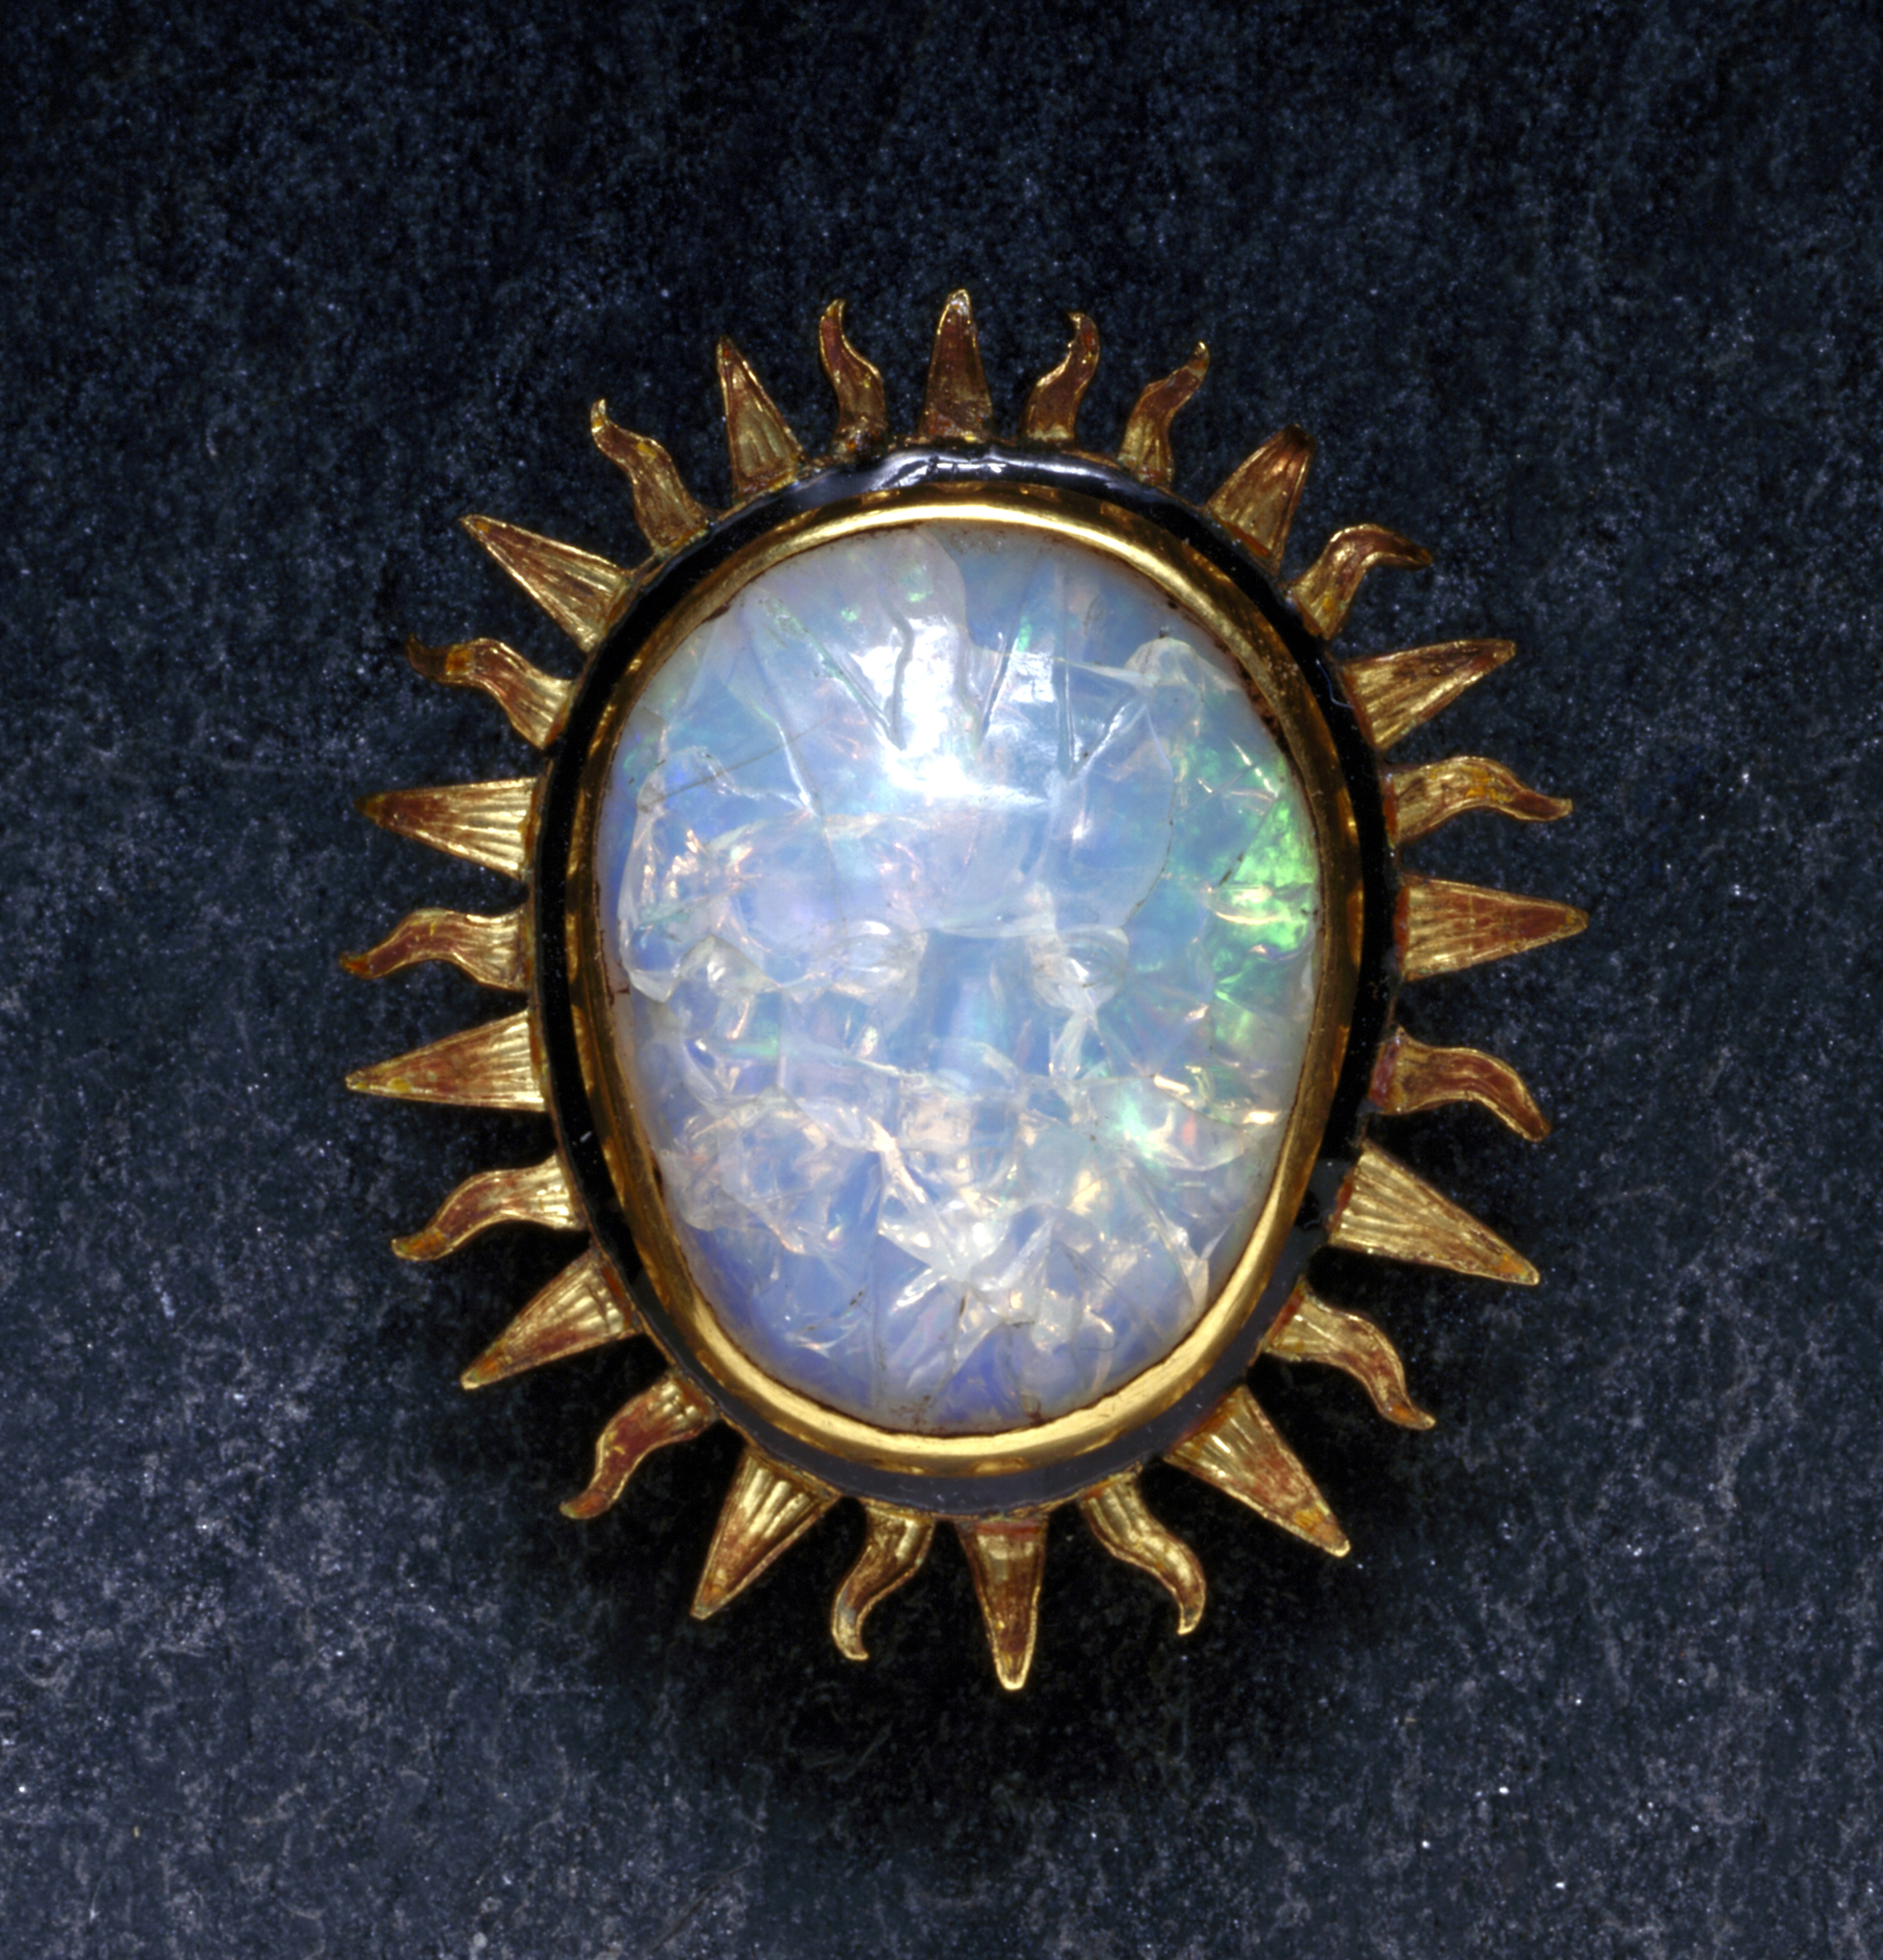 An Opal Cabochon brooch with carved face of Sun God; Its gold mounting has flame-like rays radiating out all around.